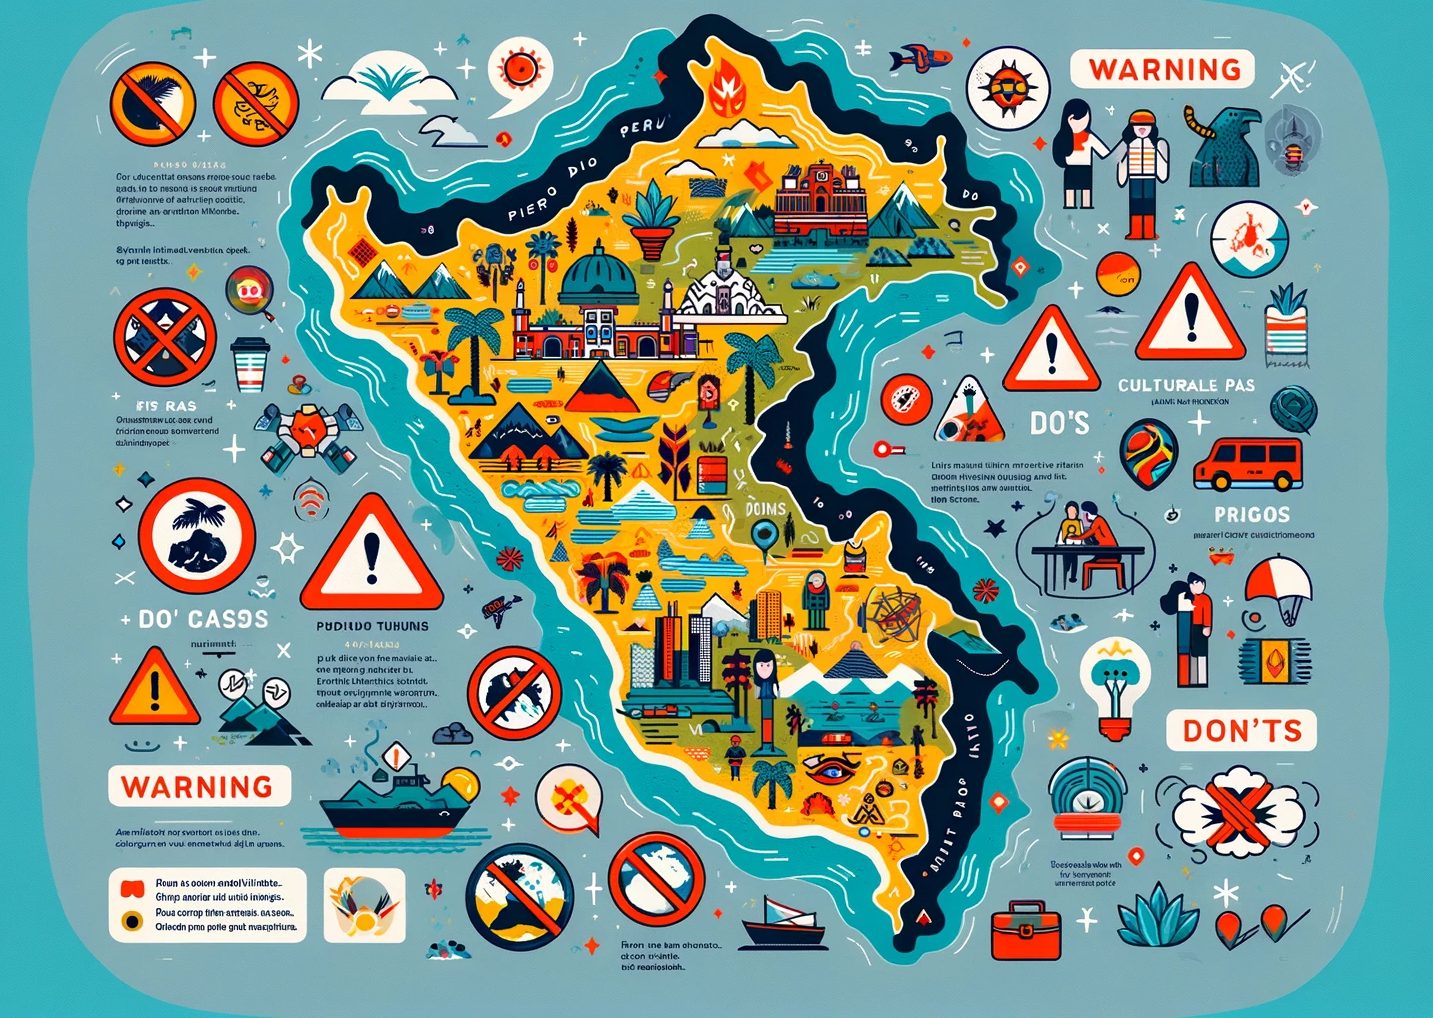 Colorful illustrated travel safety map with icons and warnings.